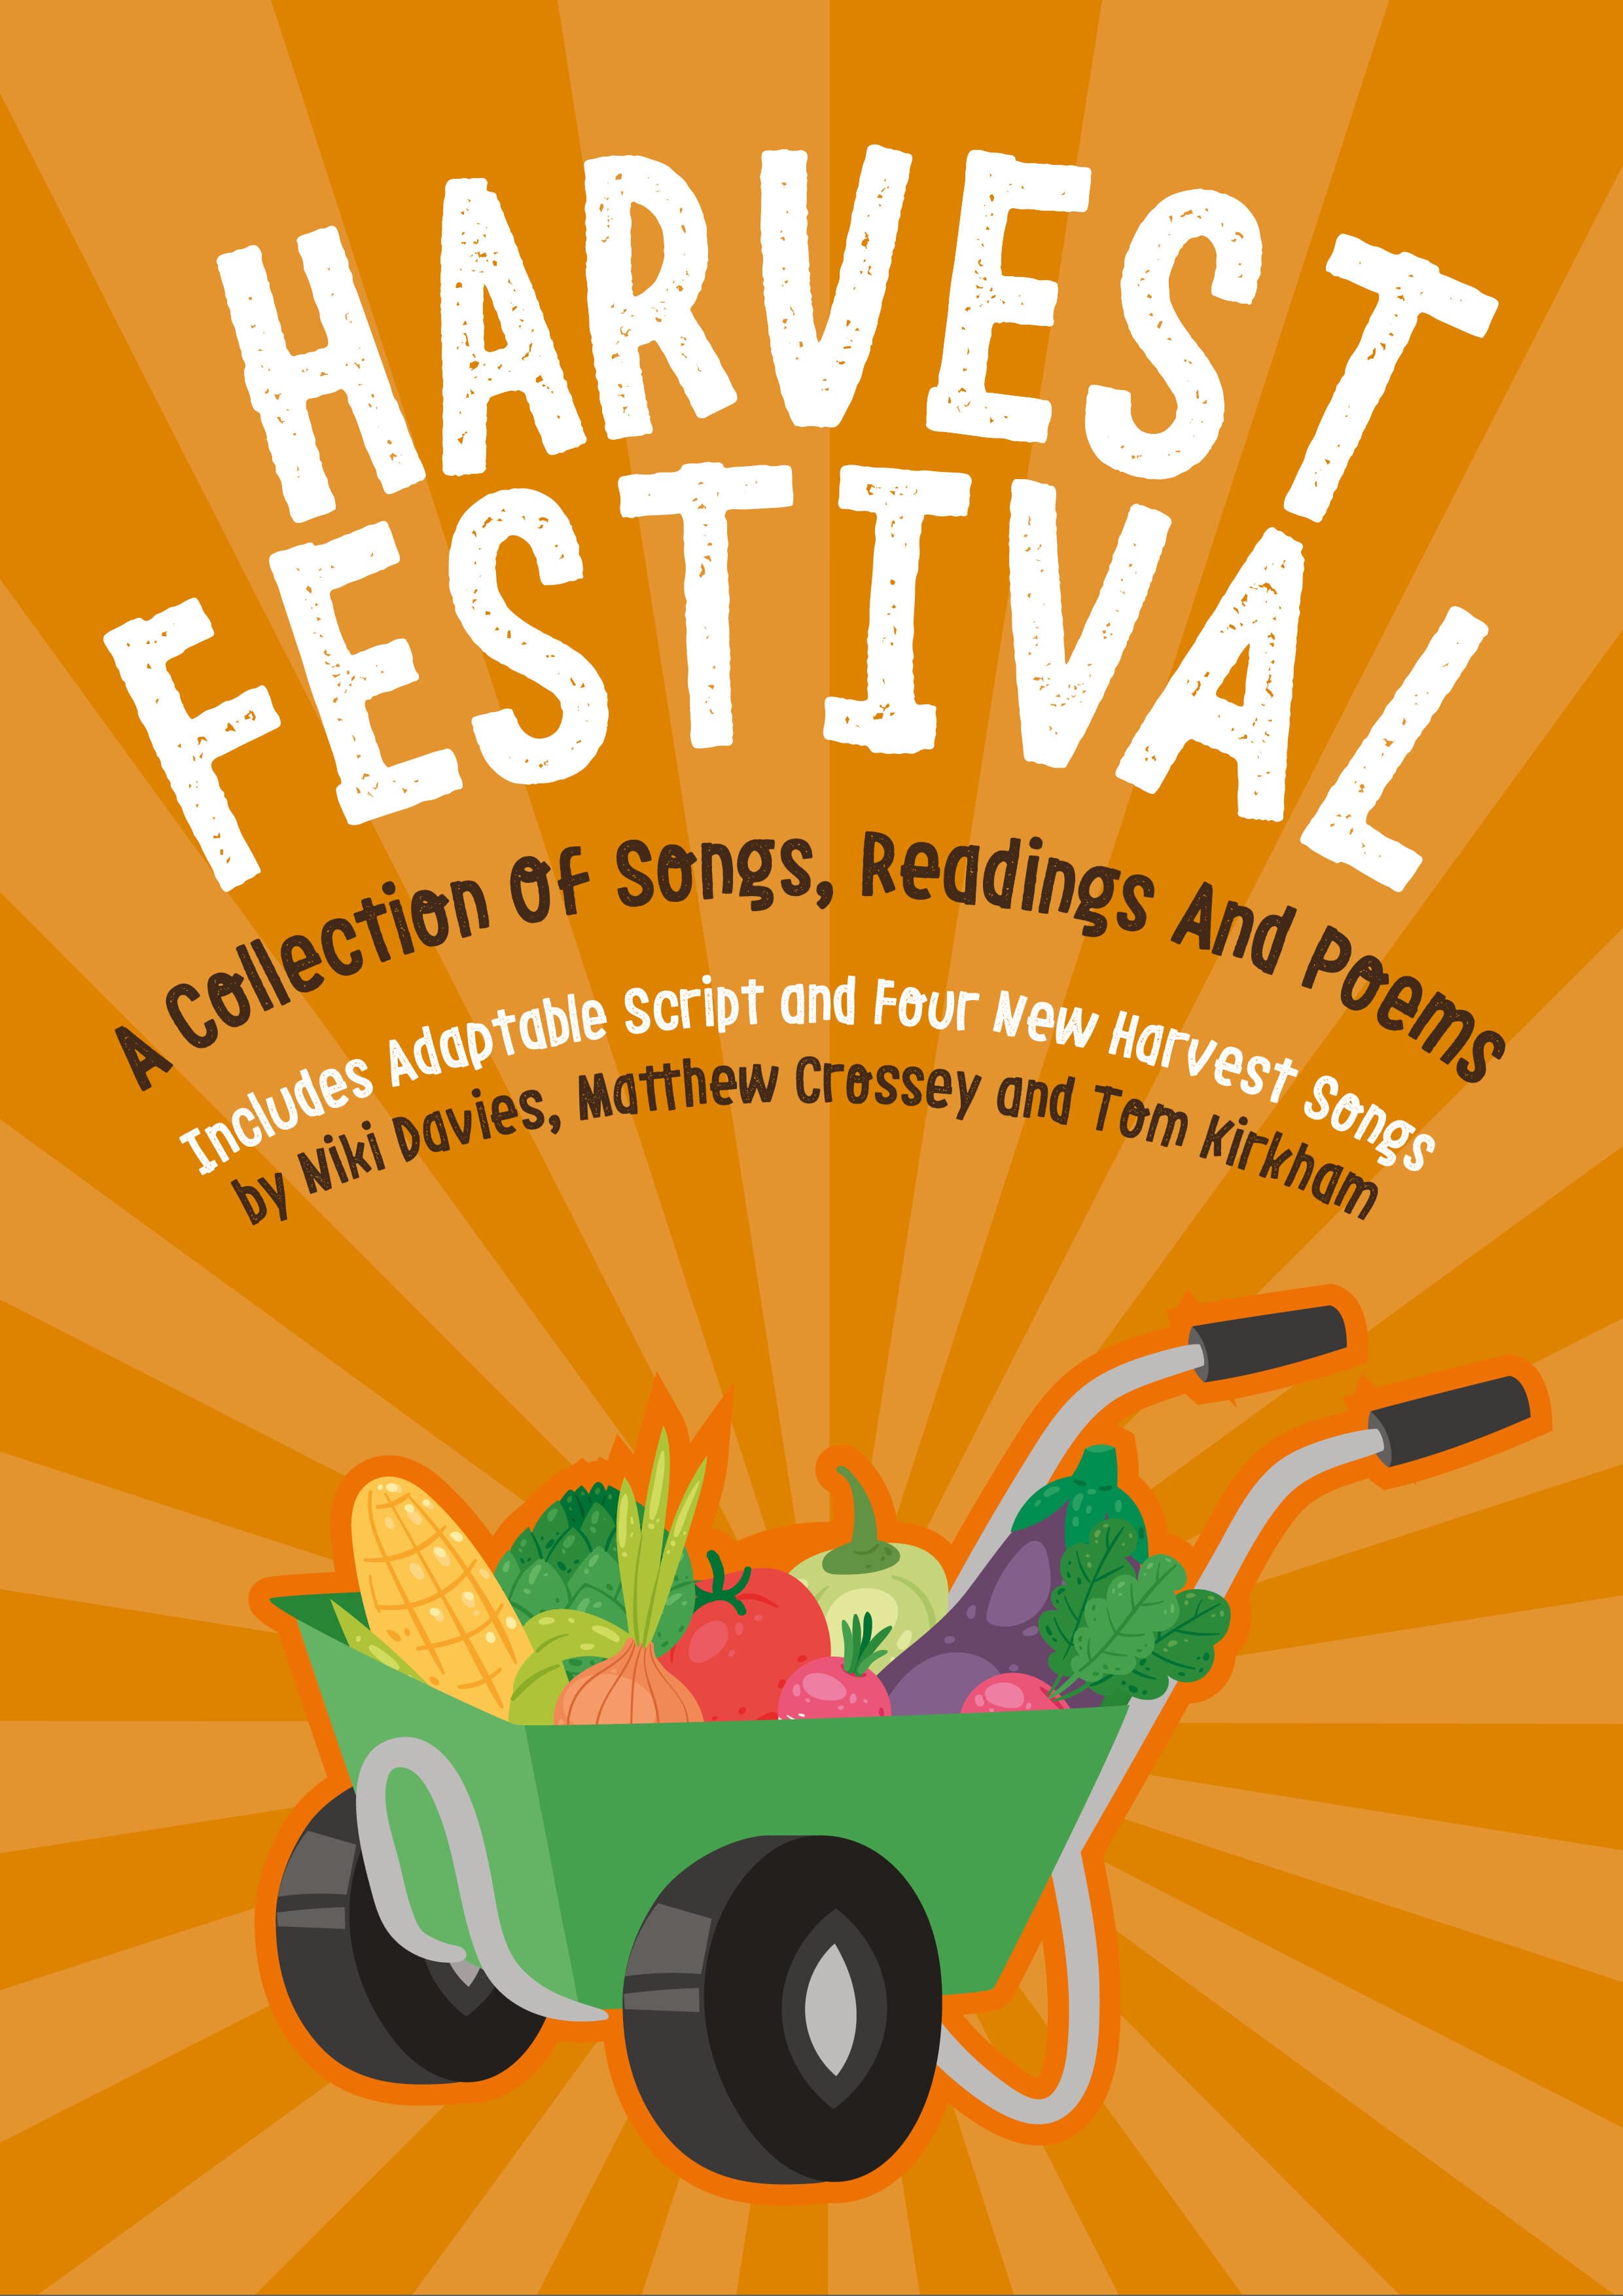 Harvest Festival Download Pack - 100% discount with code HARVEST100